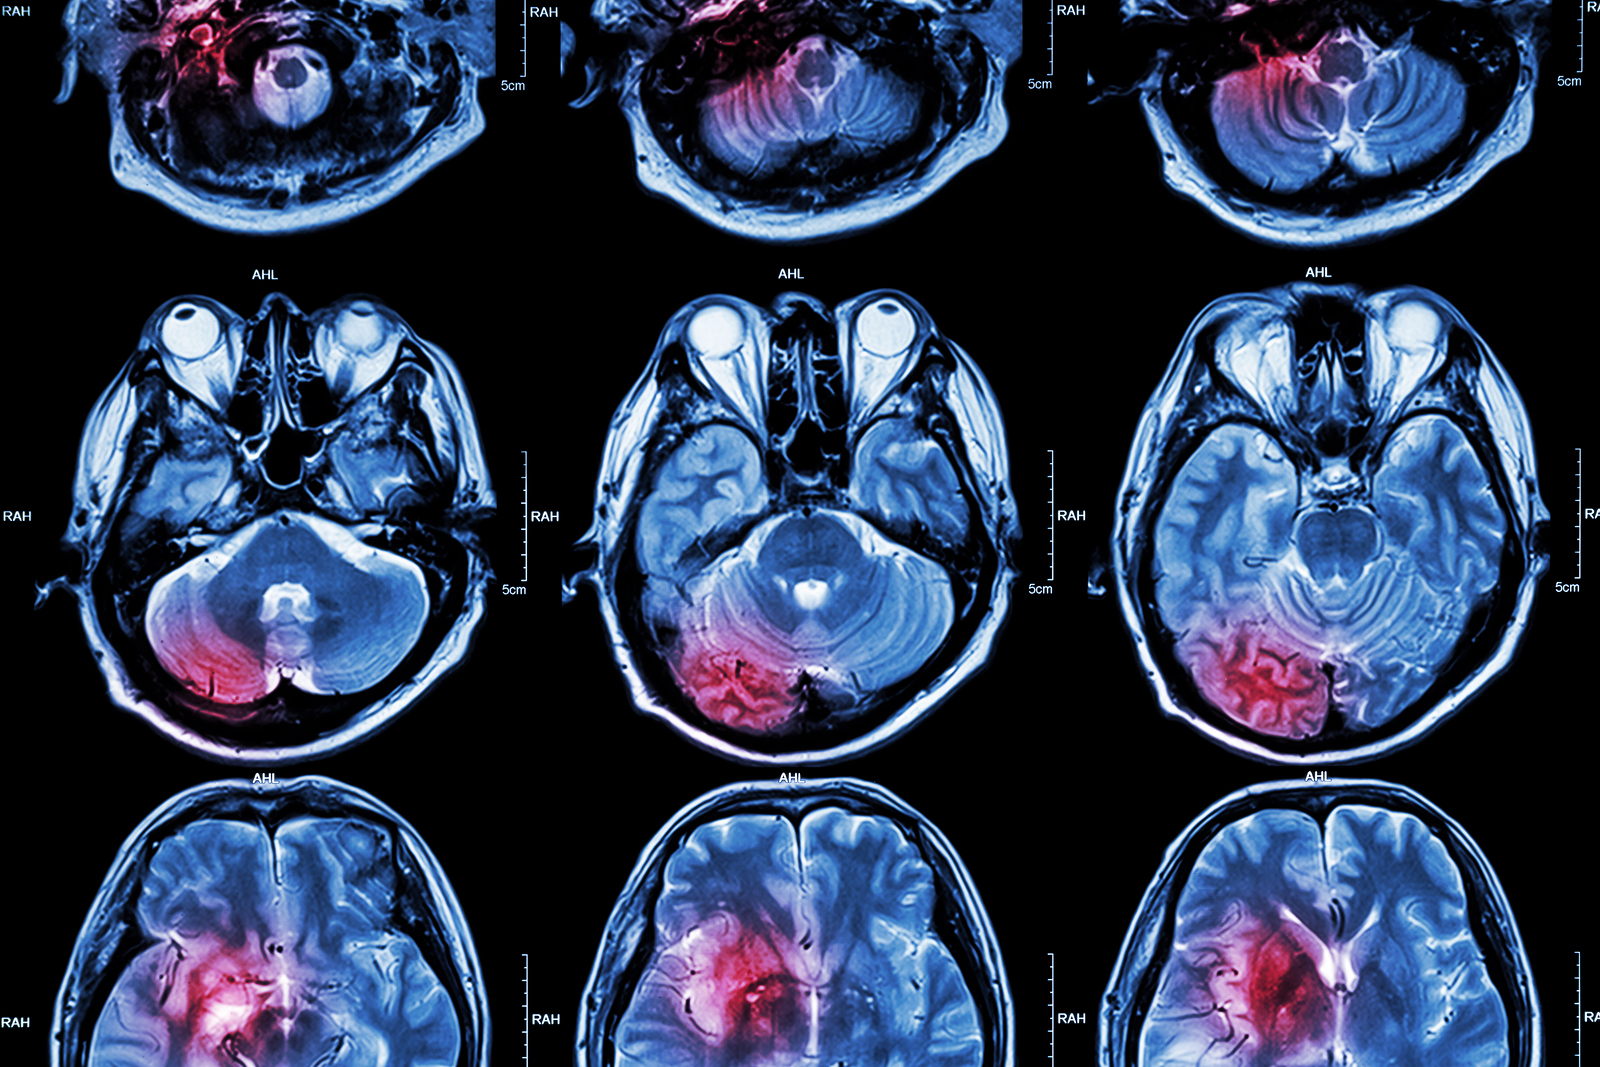 CT scan and MRI images showing brain injury